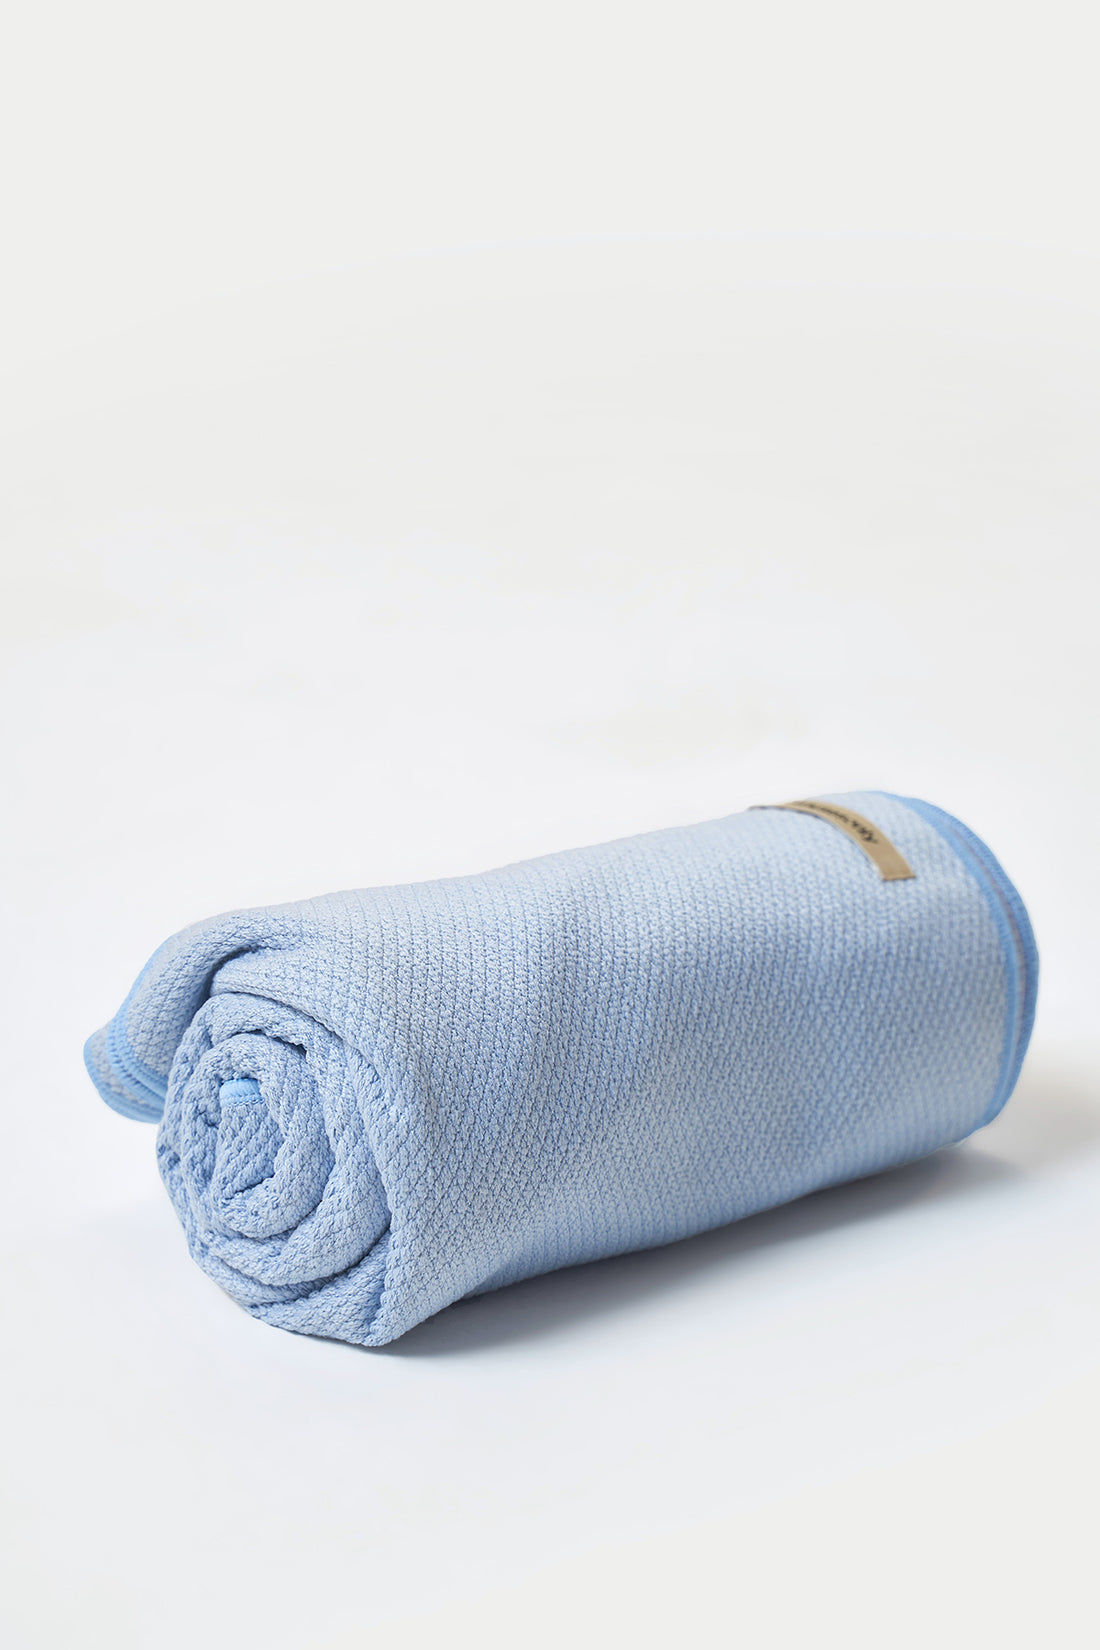 Grounded No-Slip Towel